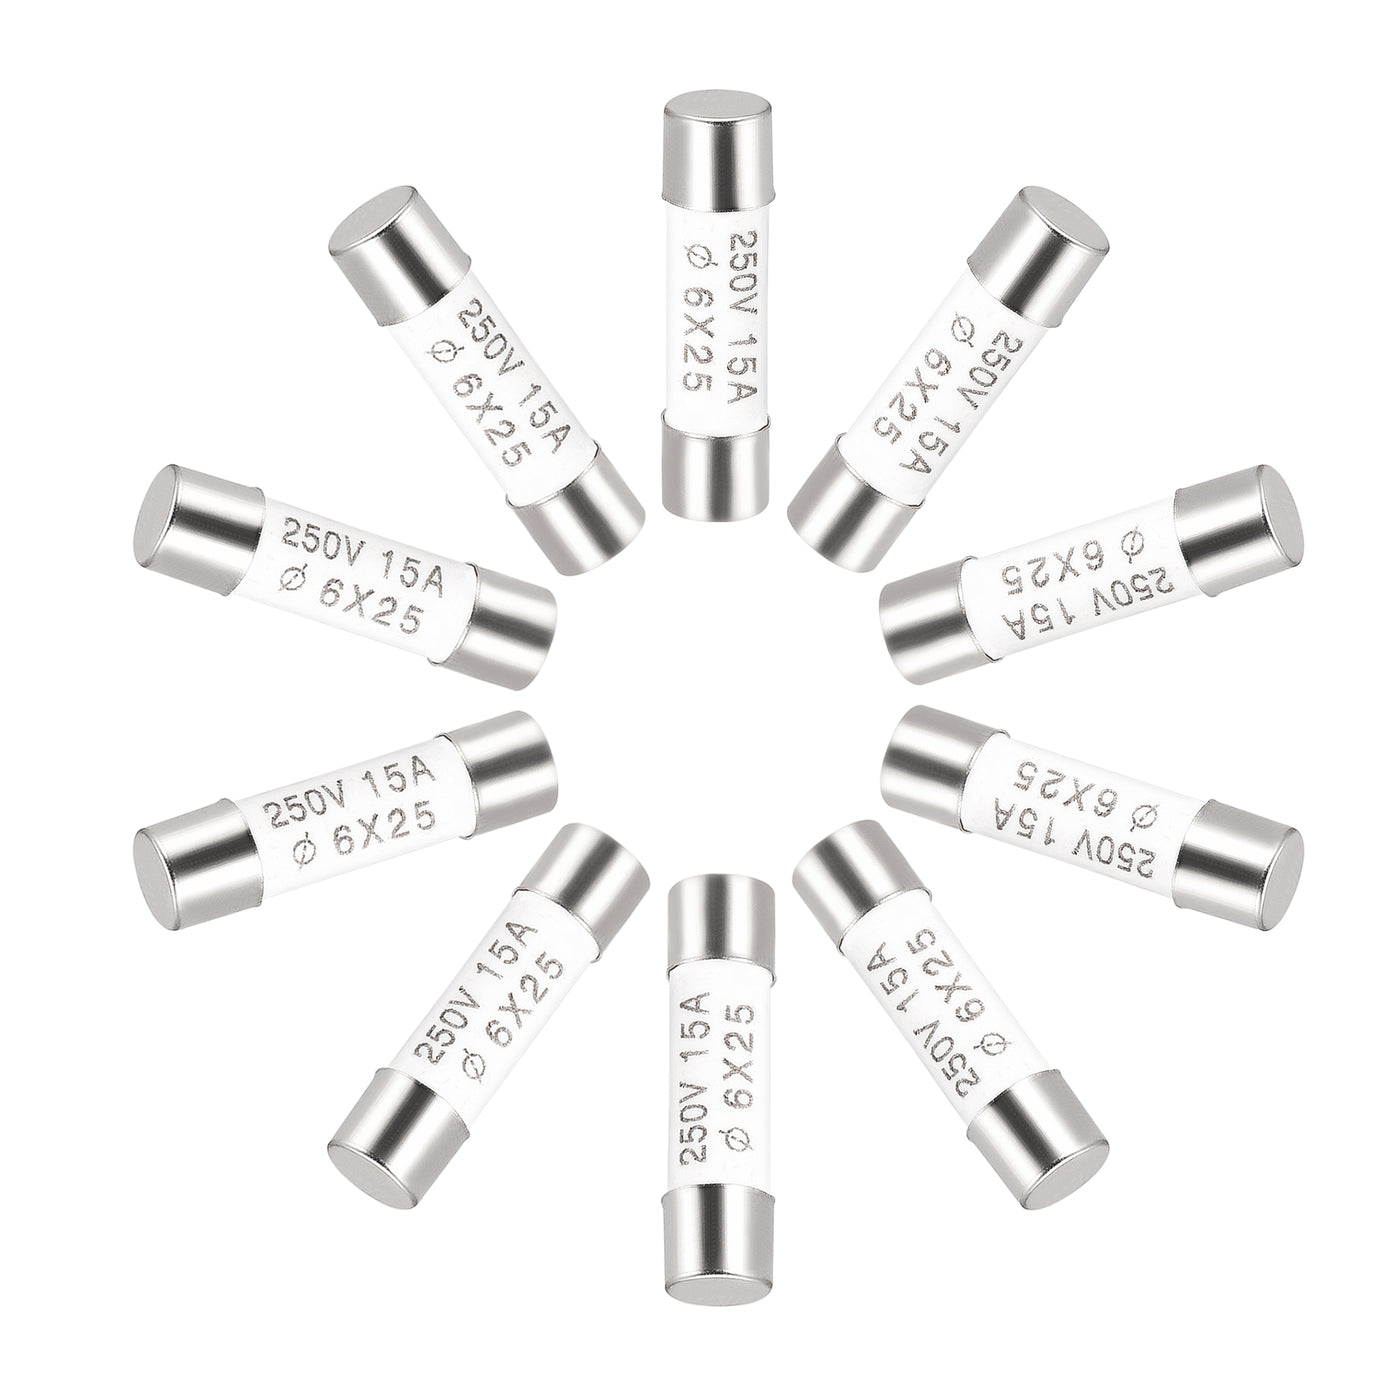 uxcell Uxcell Ceramic Cartridge Fuses 15A 250V 6x25mm Fast Blow for Energy Saving Lamp 10pcs